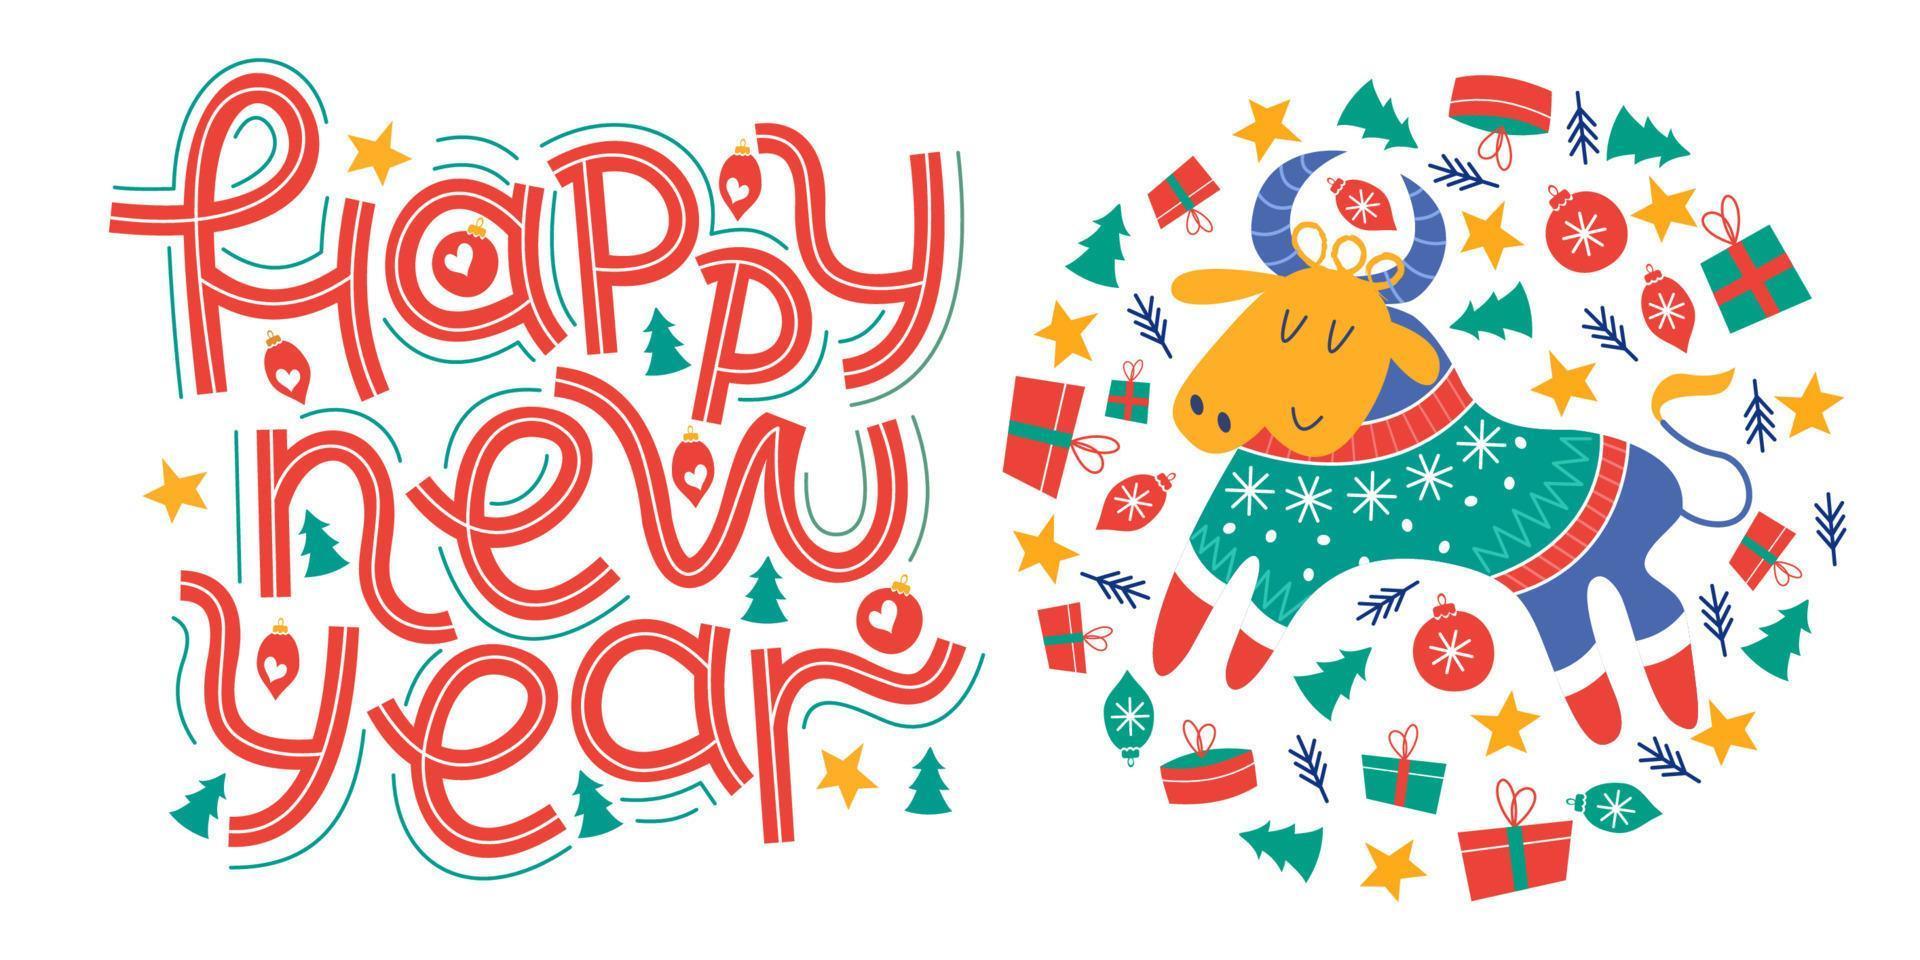 Happy new year. Vector greeting card, banner on white background.